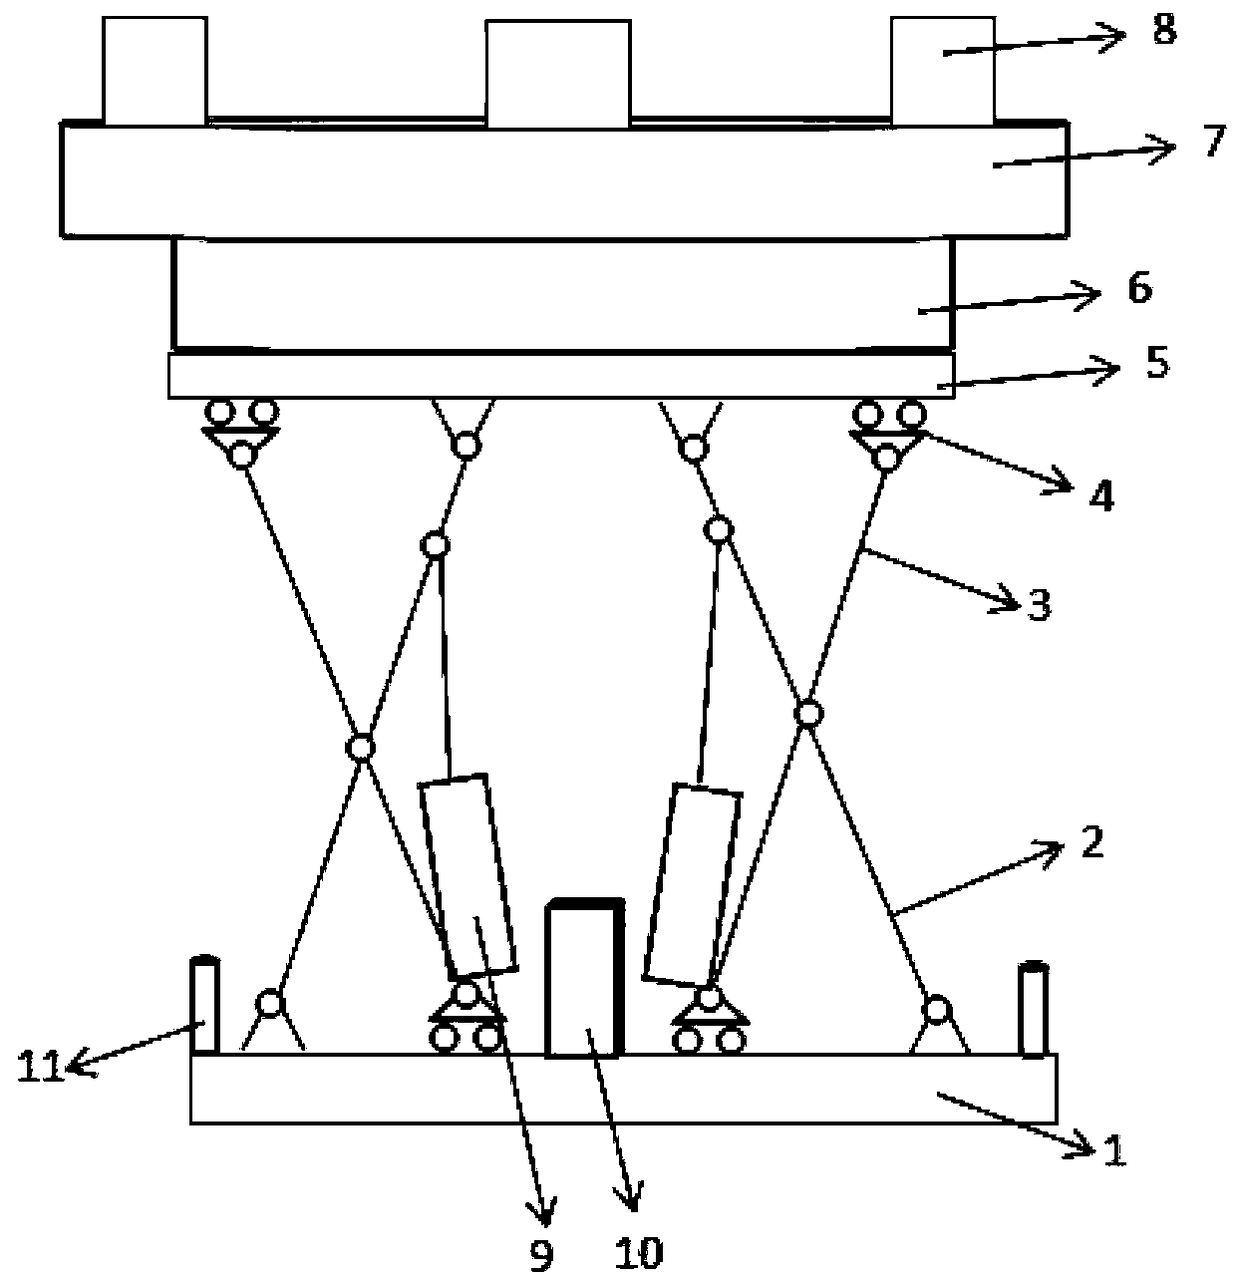 Automatic rotary device based on electronic control